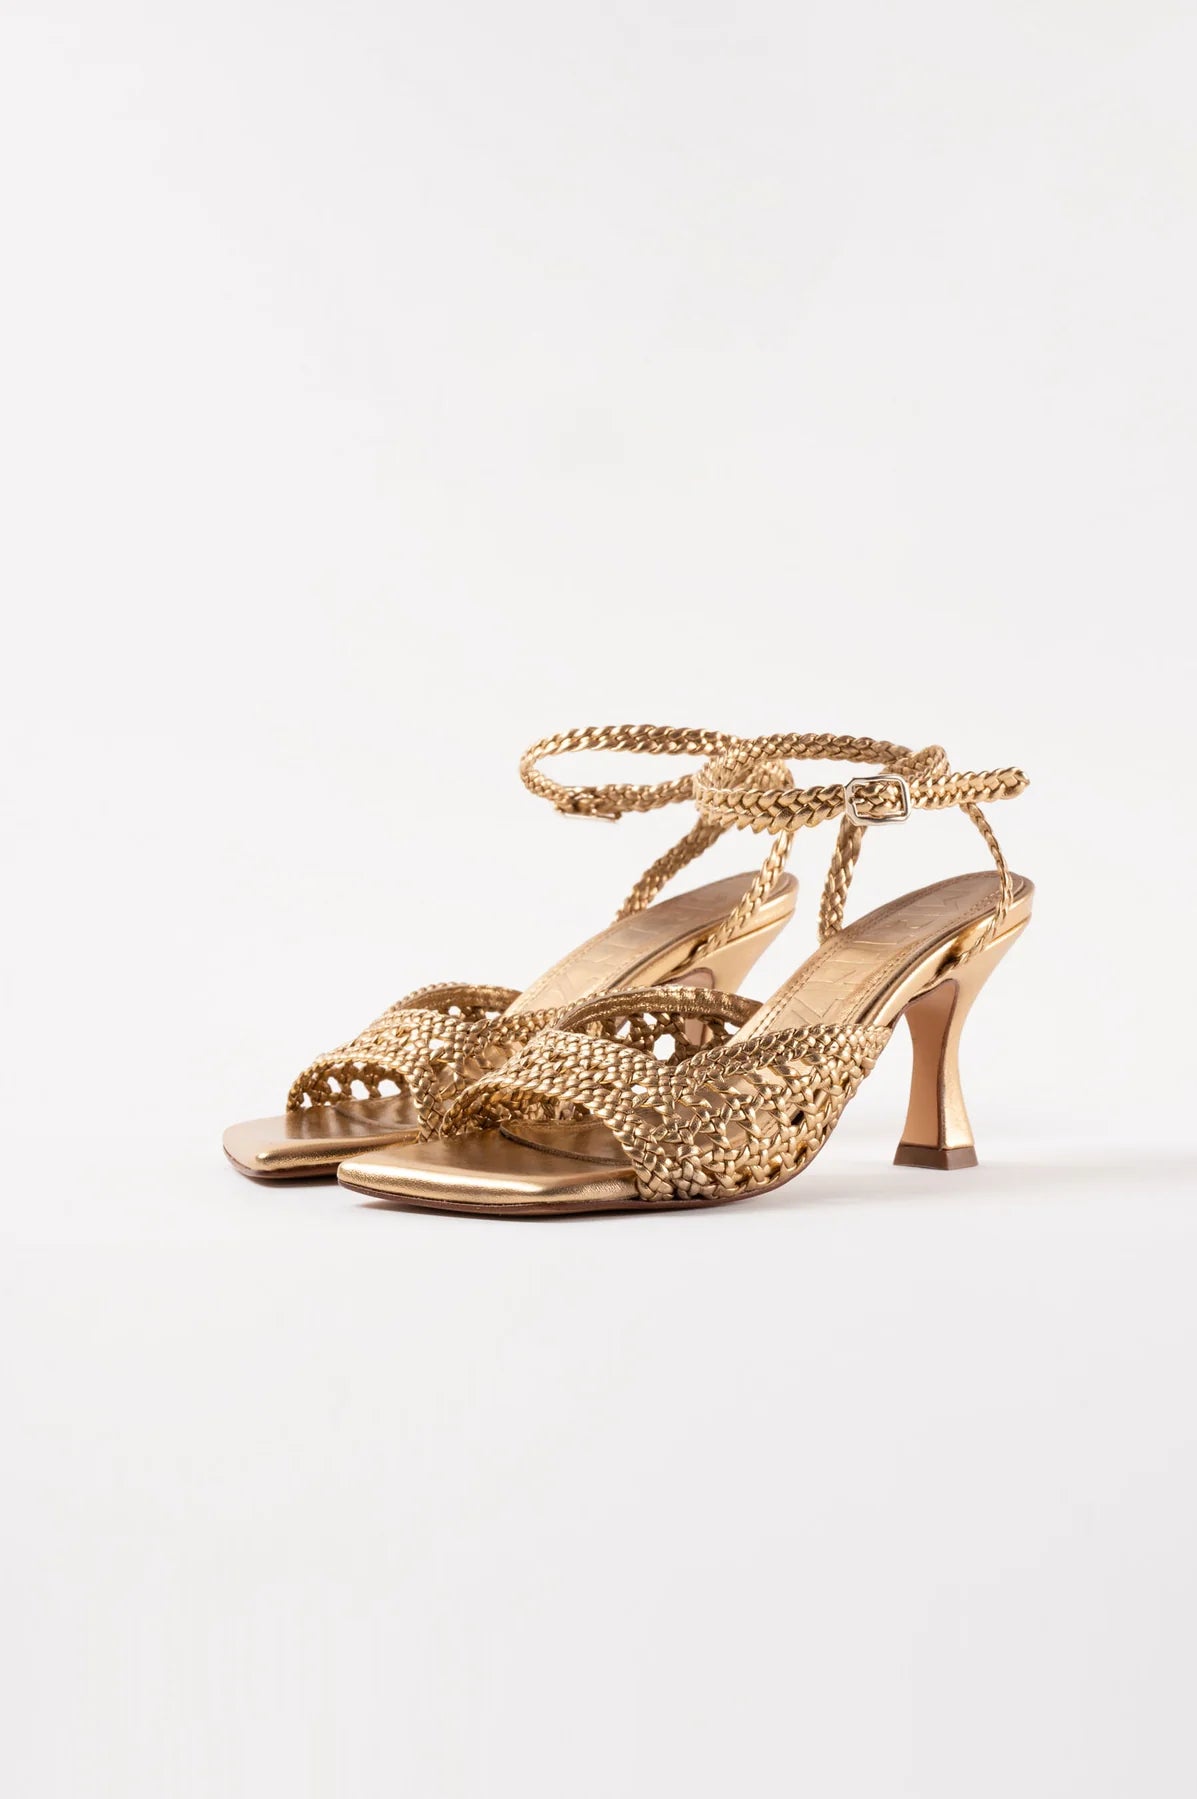 Martinez Caterina Woven Leather Sandals